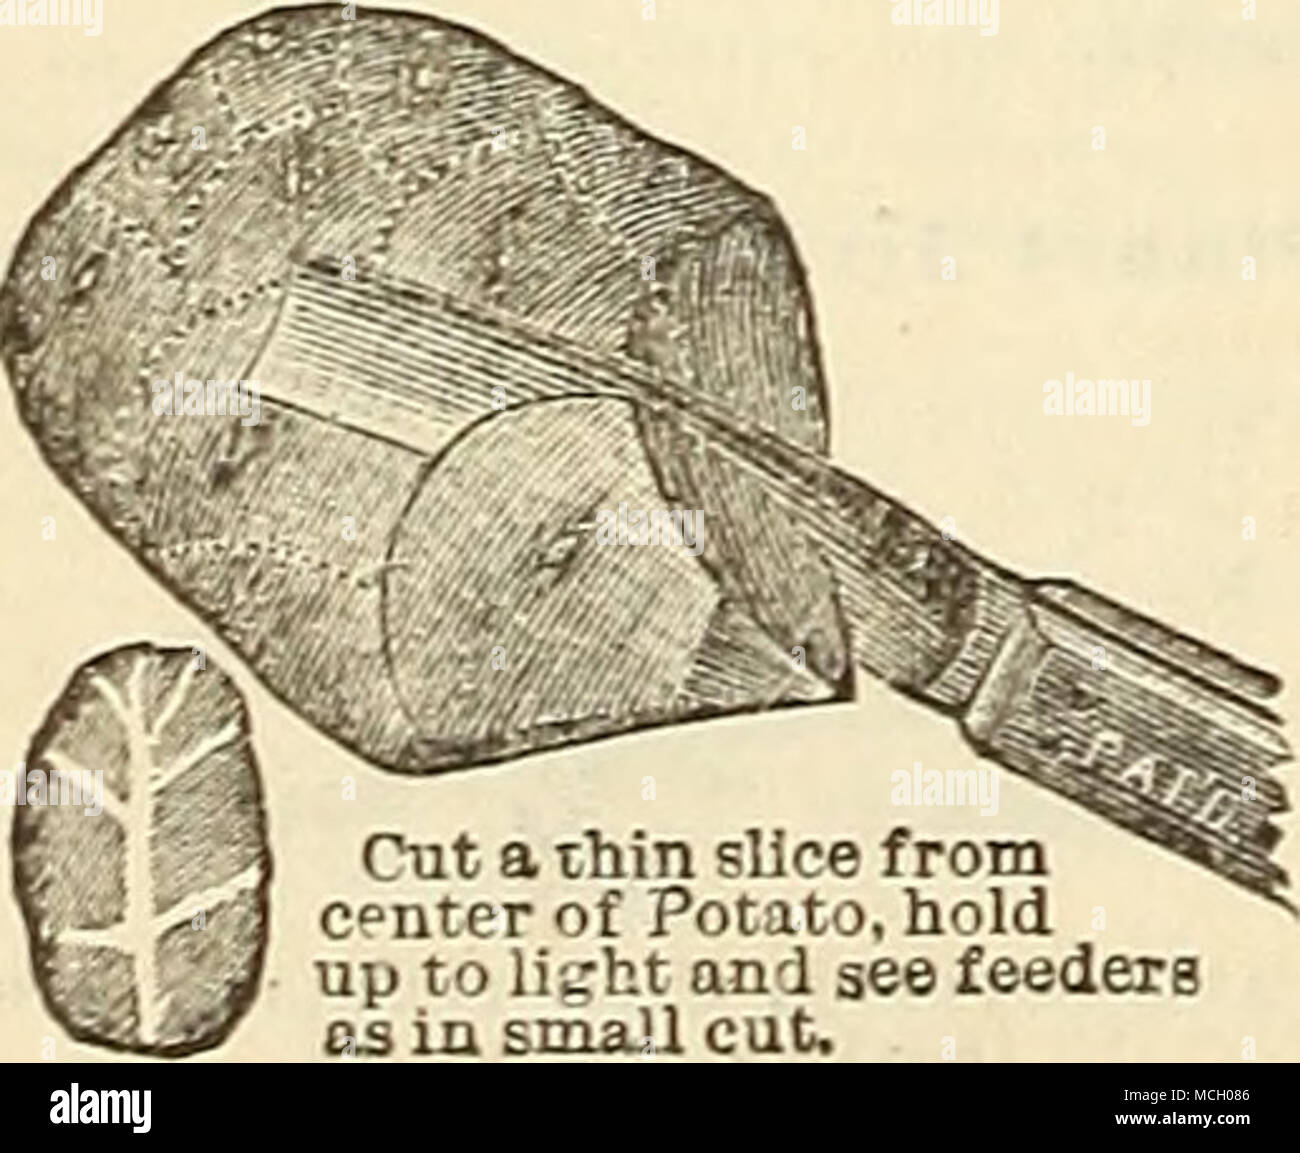 . Cut a thin slice from i - Wi c»nter of Potato, hold &quot; up to li..-ht an'J see feeders as in small cut. Concave Potato Knife. The best one yet introduced. Each (by mail), 35 cts. Hand &quot;Wftter Truck and Barrel. An indispensable article for farmers and gardeners who have water to carry. The weight is raised easily and balanced over the axle, so that no lifting or down pressure is needed in moving it. Also has a sprinkling at- tachment. Water Truck and Barrel, li inch tires, $10.00. Water Truck and Barrel, 2i inch tires, $12.00. Water Truck and Barrel, 4 inch tires, $14.00. Sprinkling a Stock Photo